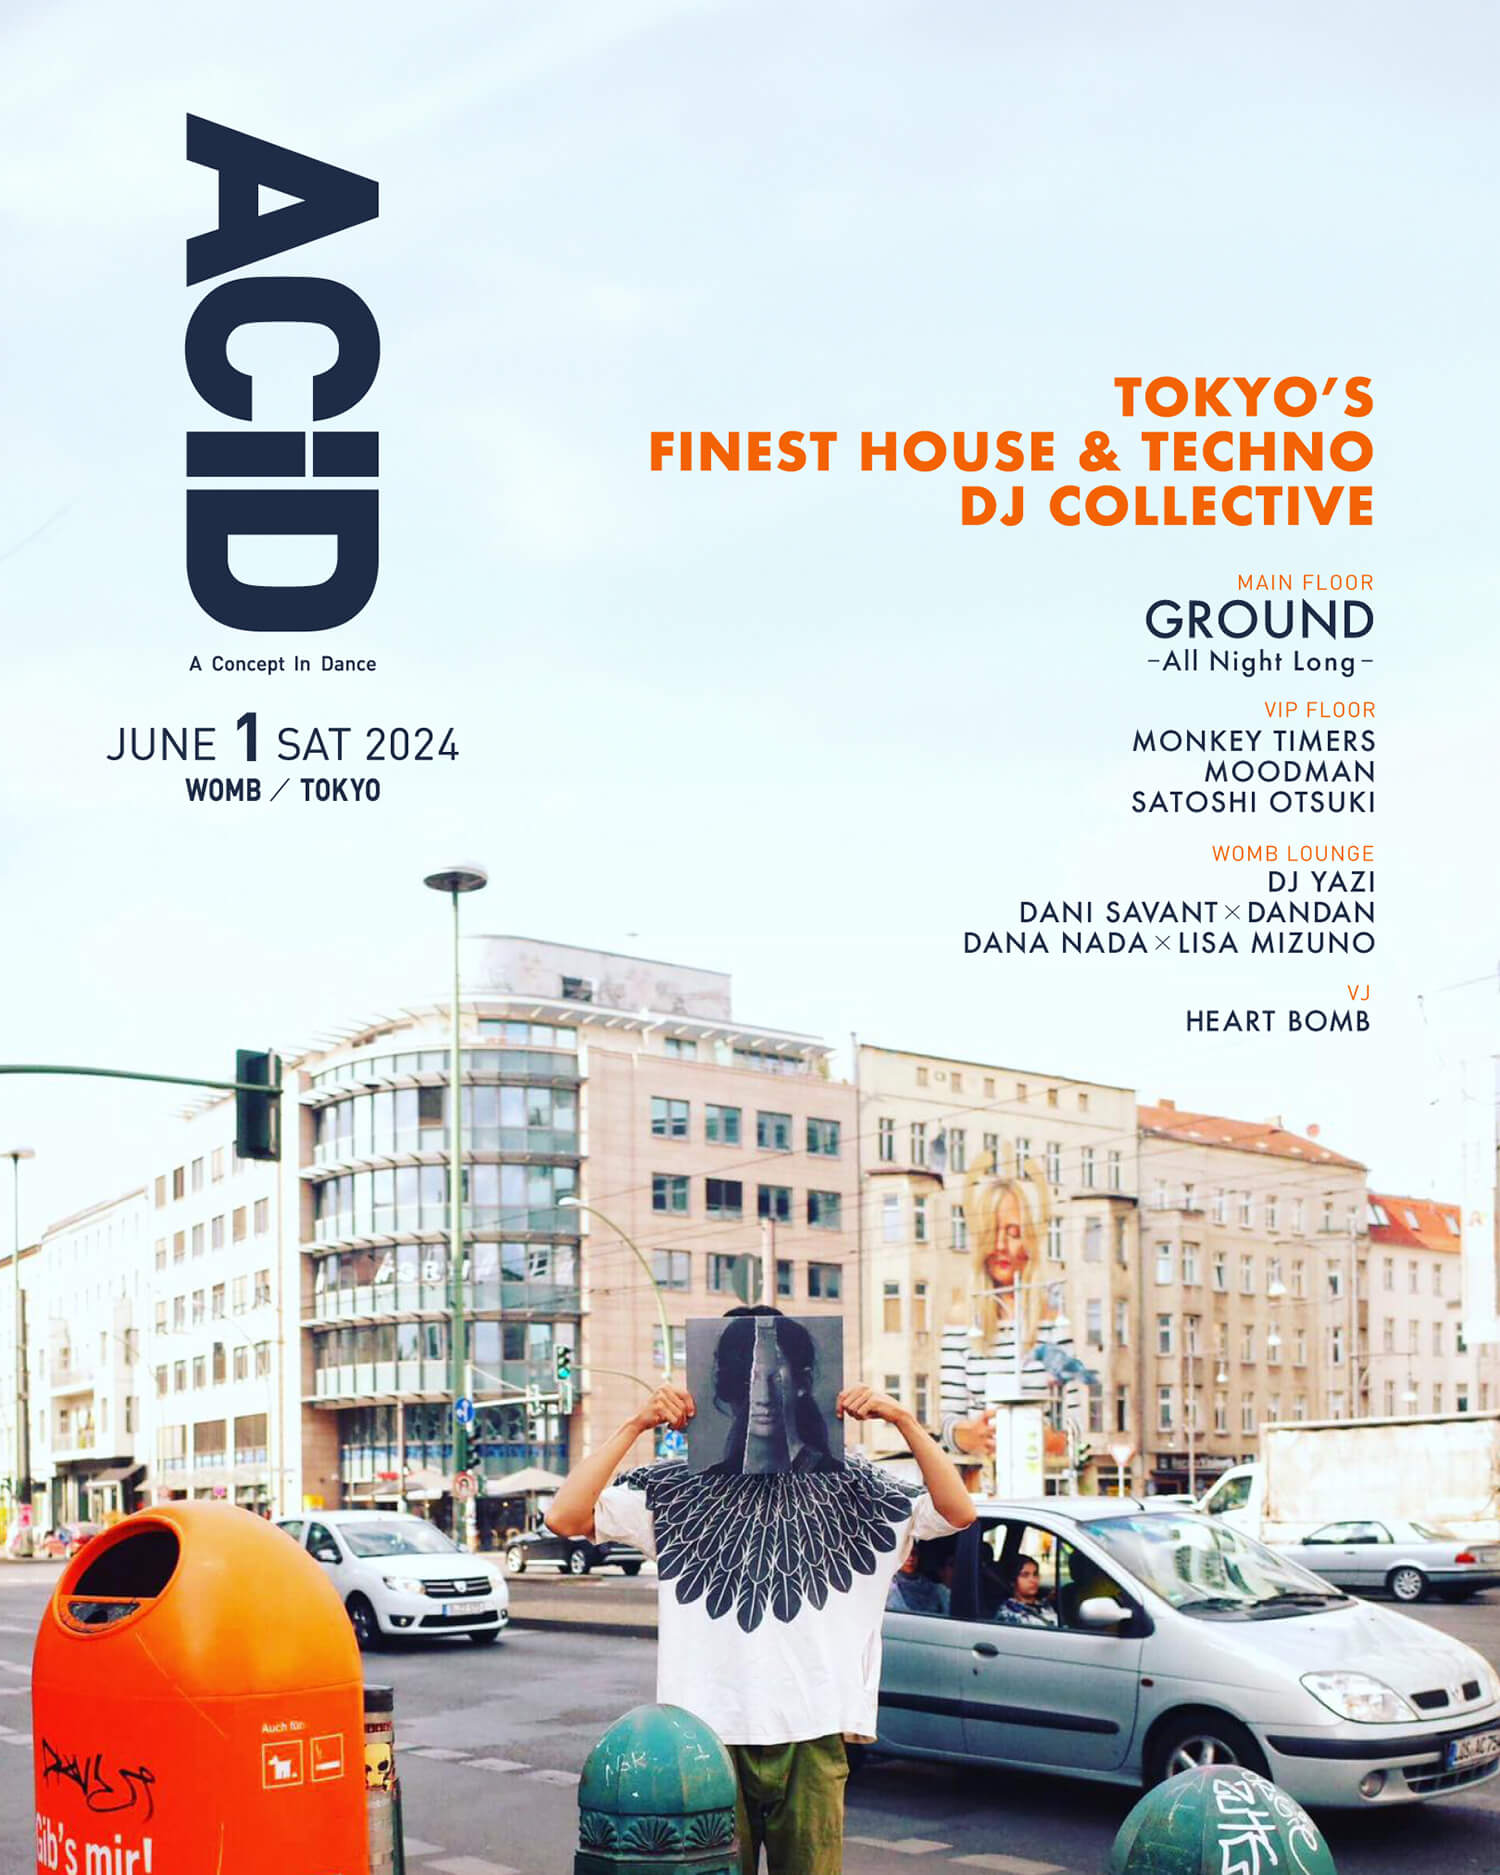 ACiD: A Concept in Dance - TOKYO’S FINEST HOUSE & TECHNO DJ COLLECTIVE